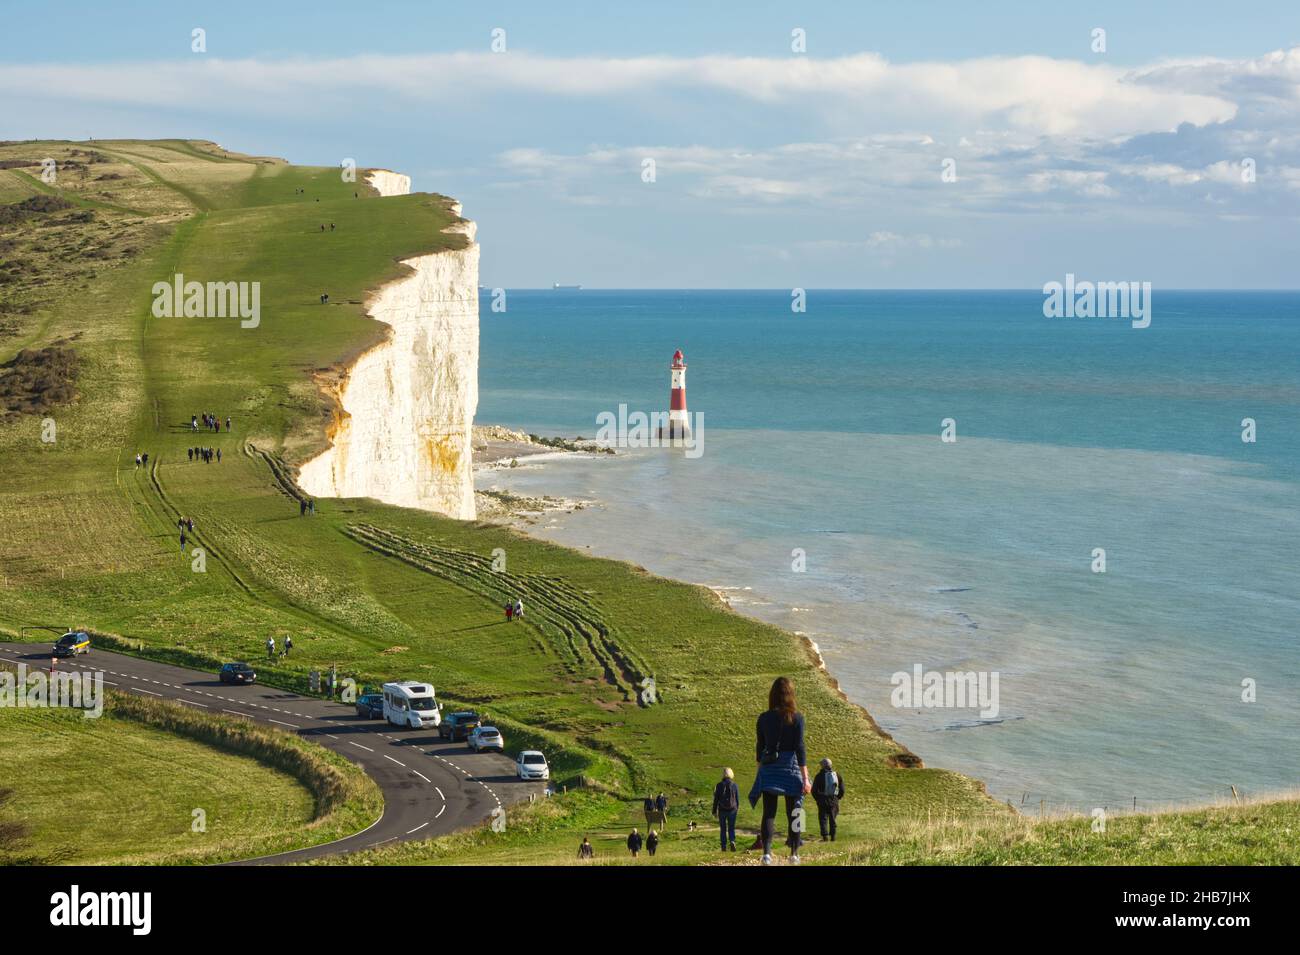 View to Beachy Head on the South Downs near Eastbourne in East Sussex, England. With people walking and sightseeing Stock Photo